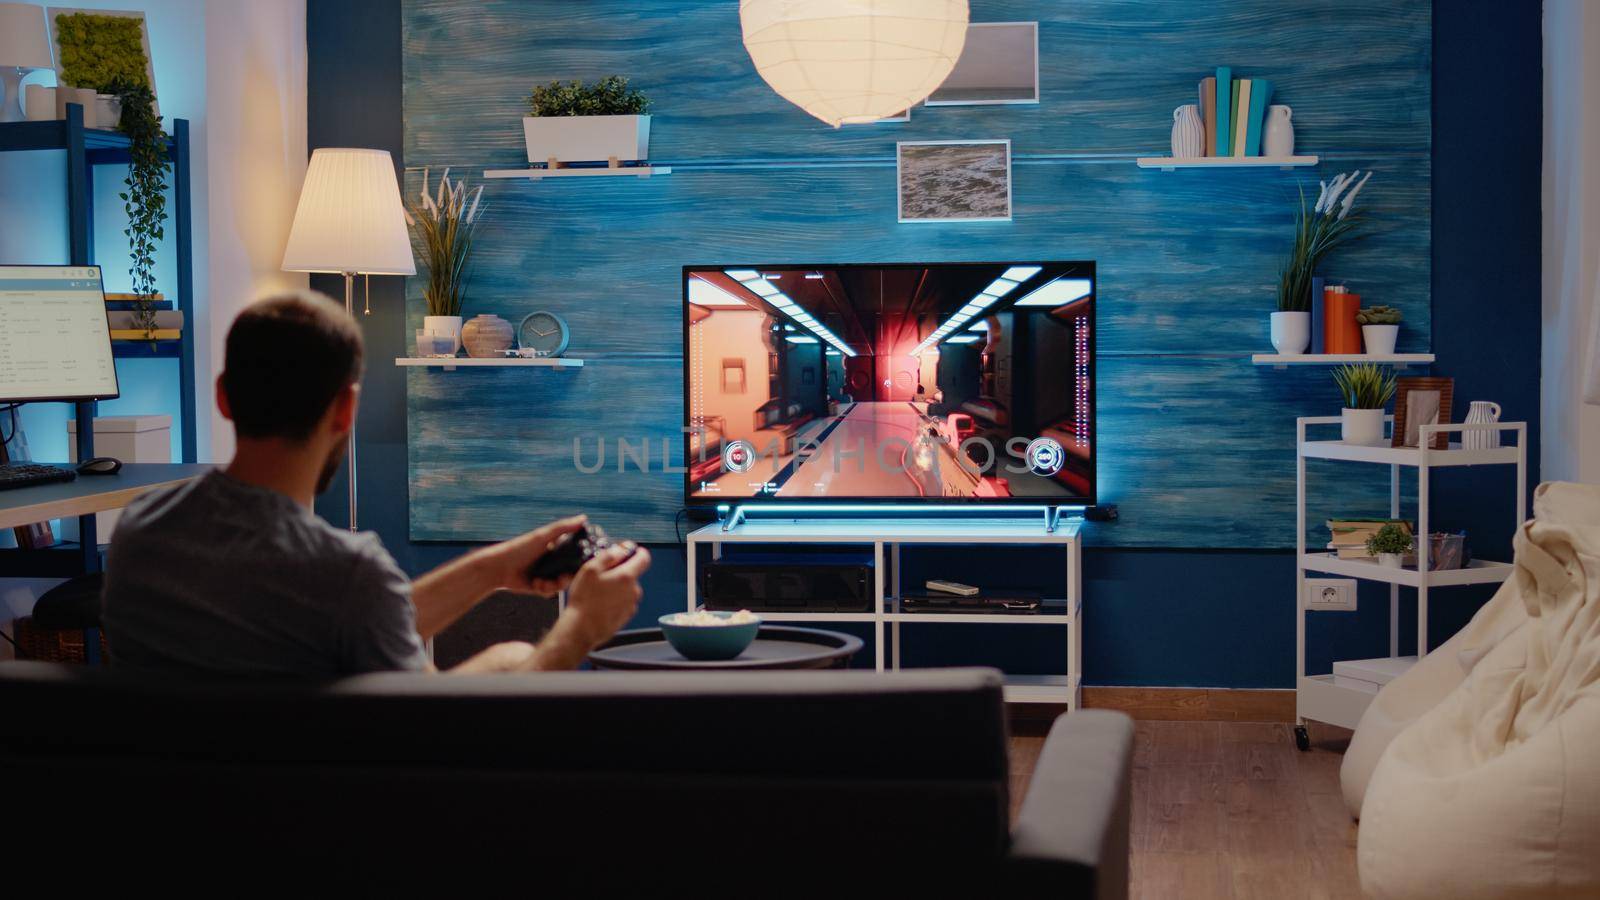 Caucasian man playing action games on tv console by DCStudio